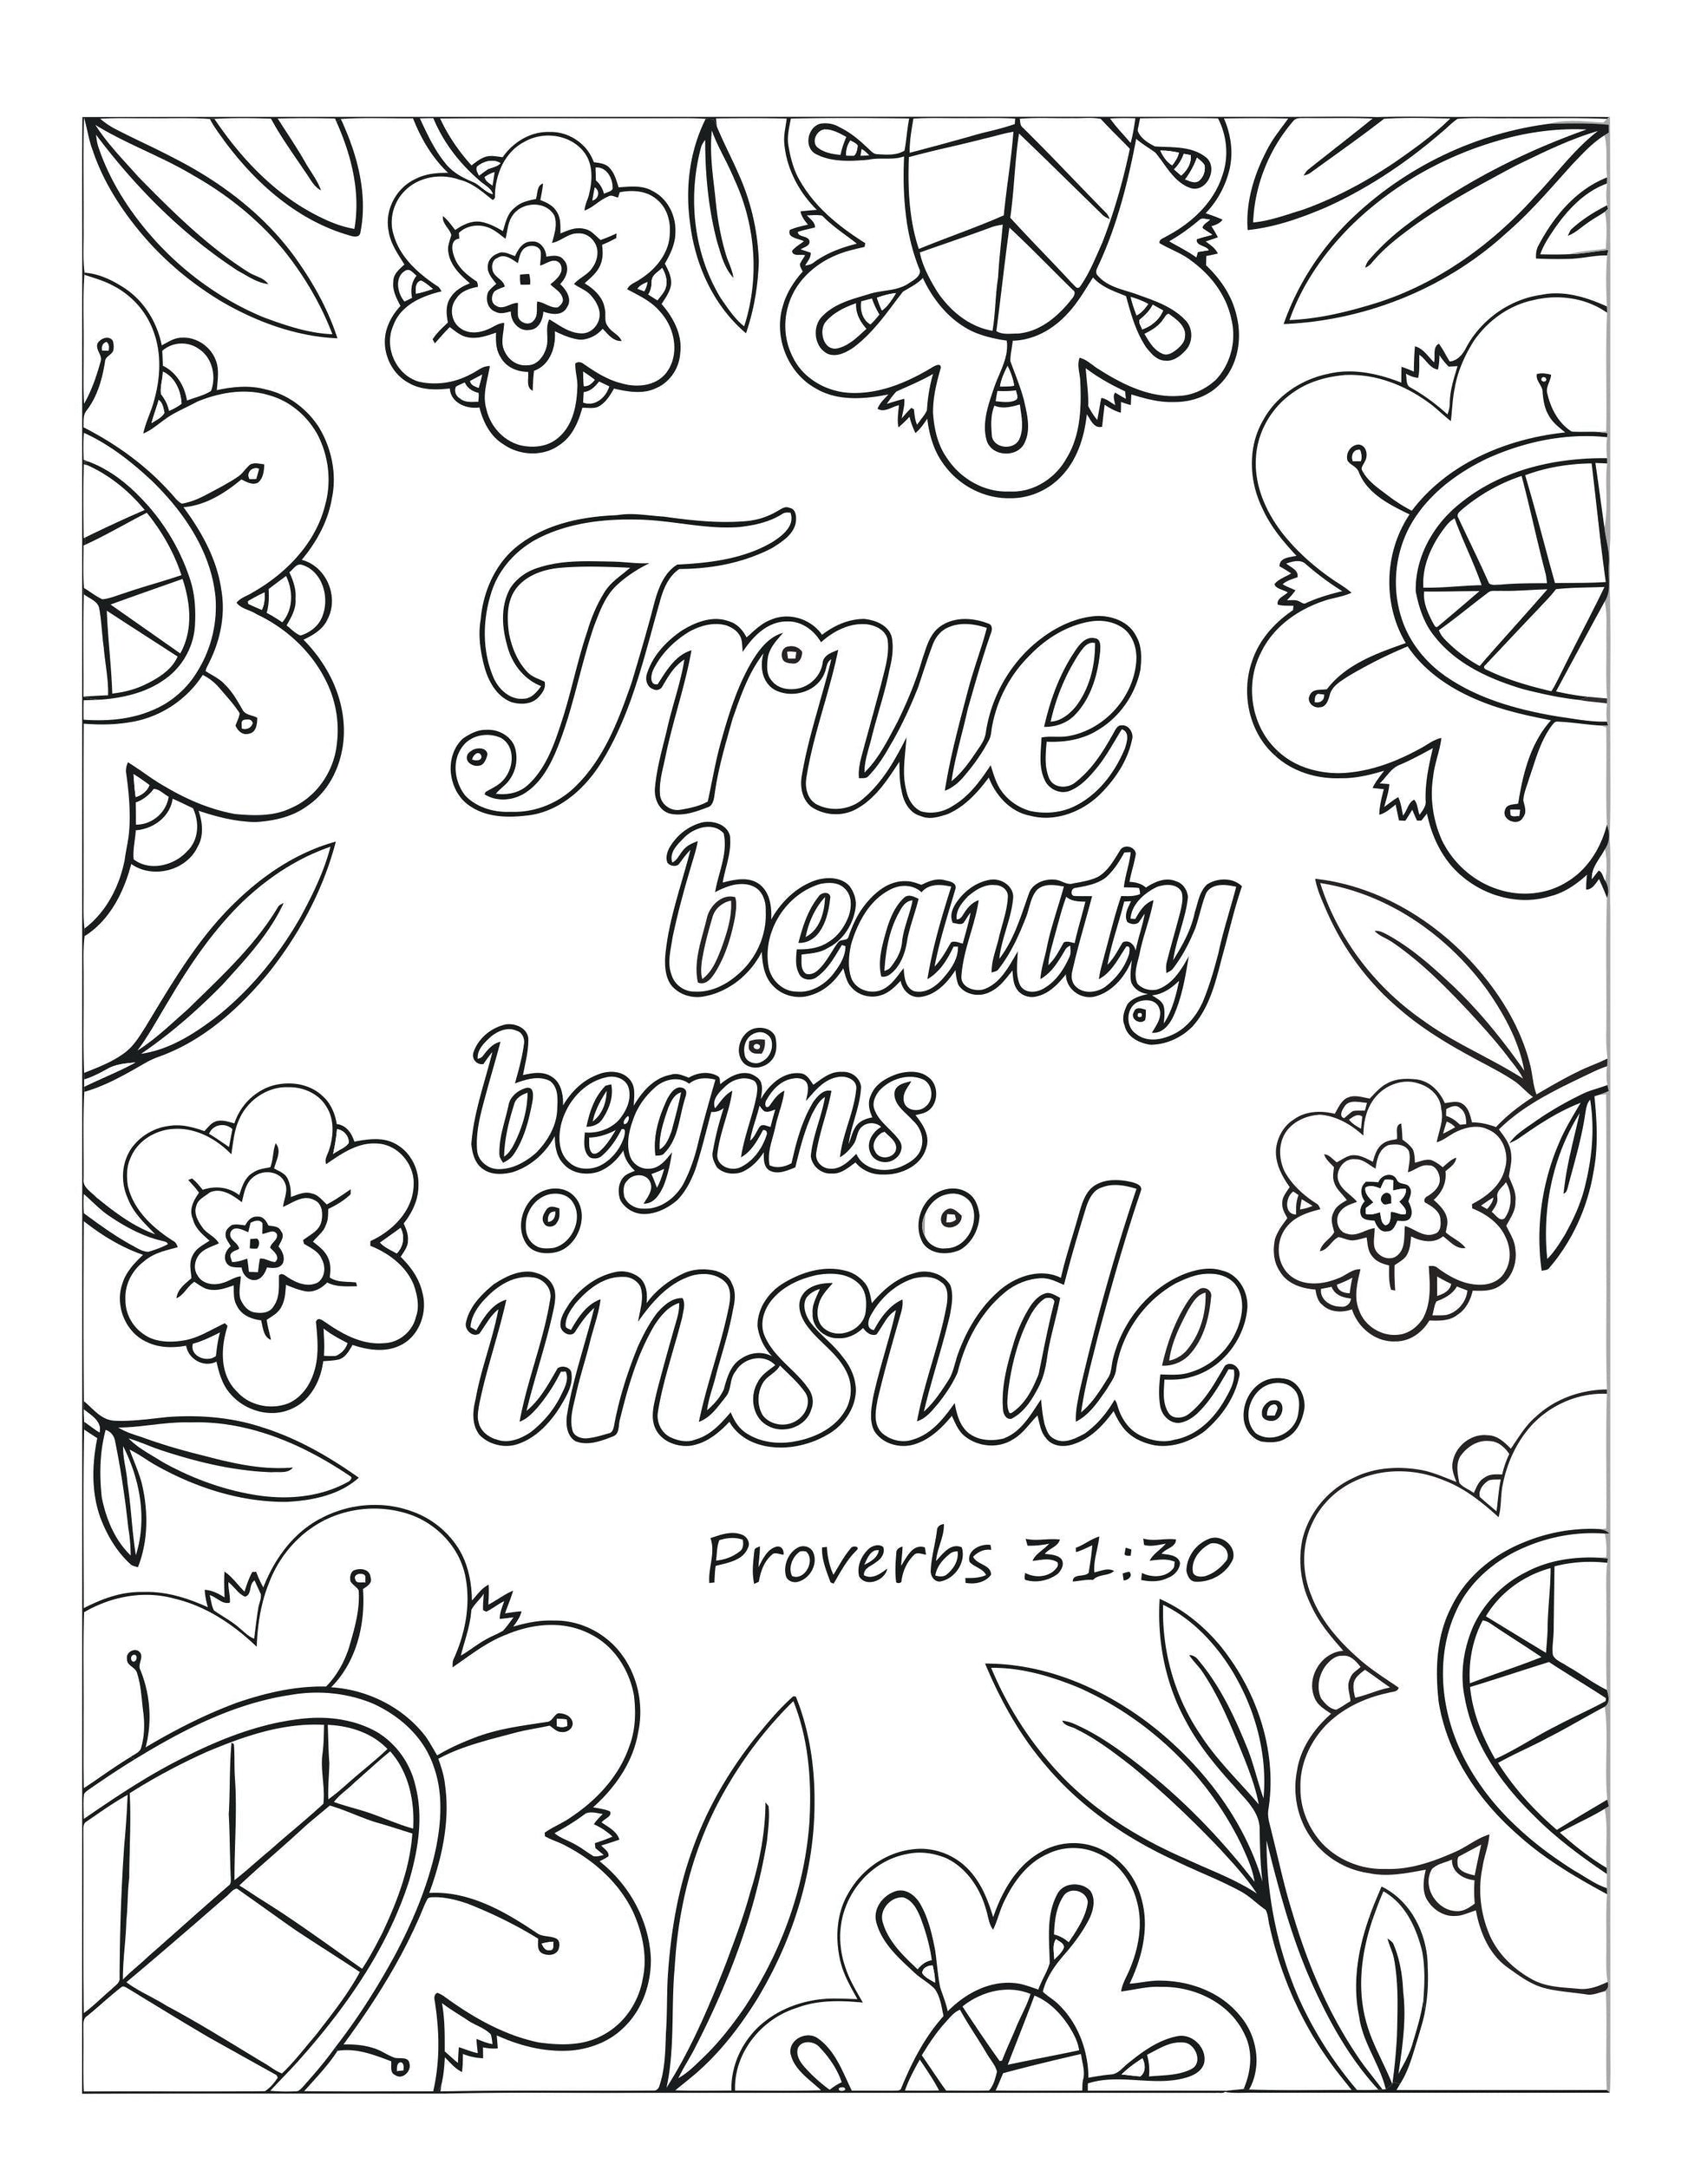 Bible memory verse coloring book pages download only